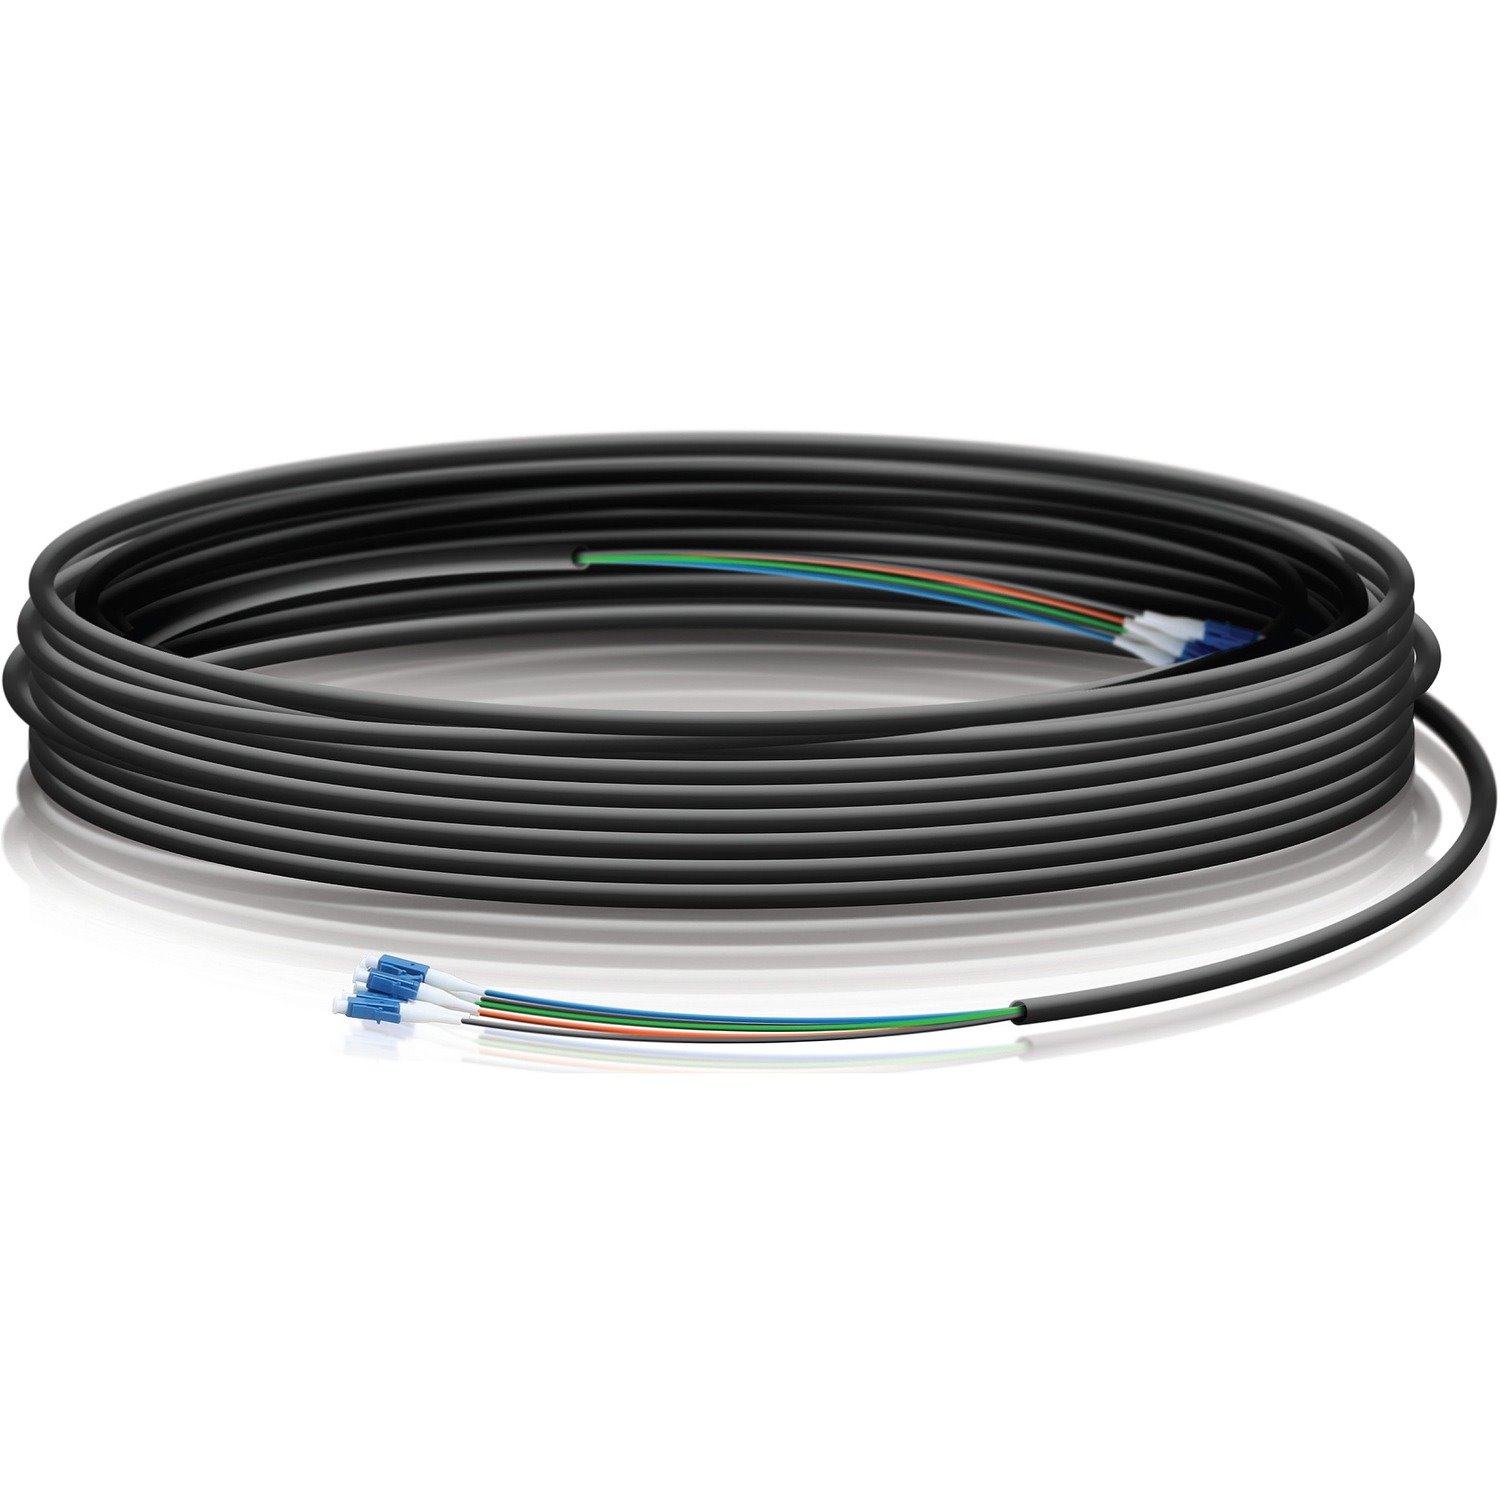 Ubiquiti 30.48 m Fibre Optic Network Cable for Network Device, Switch, Router